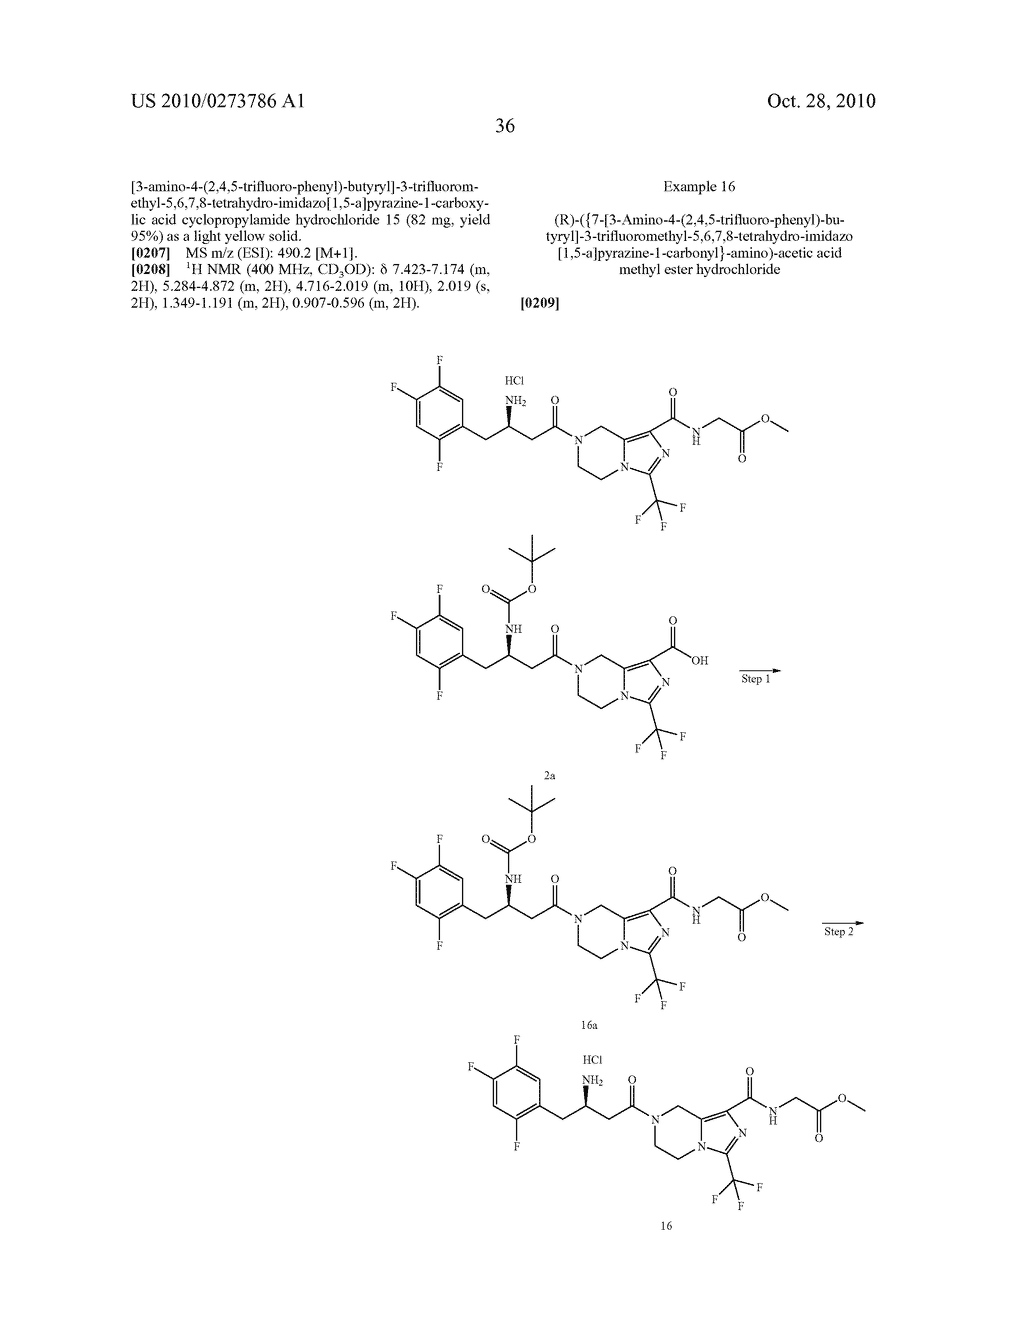 TETRAHYDRO-IMIDAZ0[1,5-A]PYRAZINE DERIVATIVES, PREPARATION PROCESS AND MEDICINAL USE THEREOF - diagram, schematic, and image 37